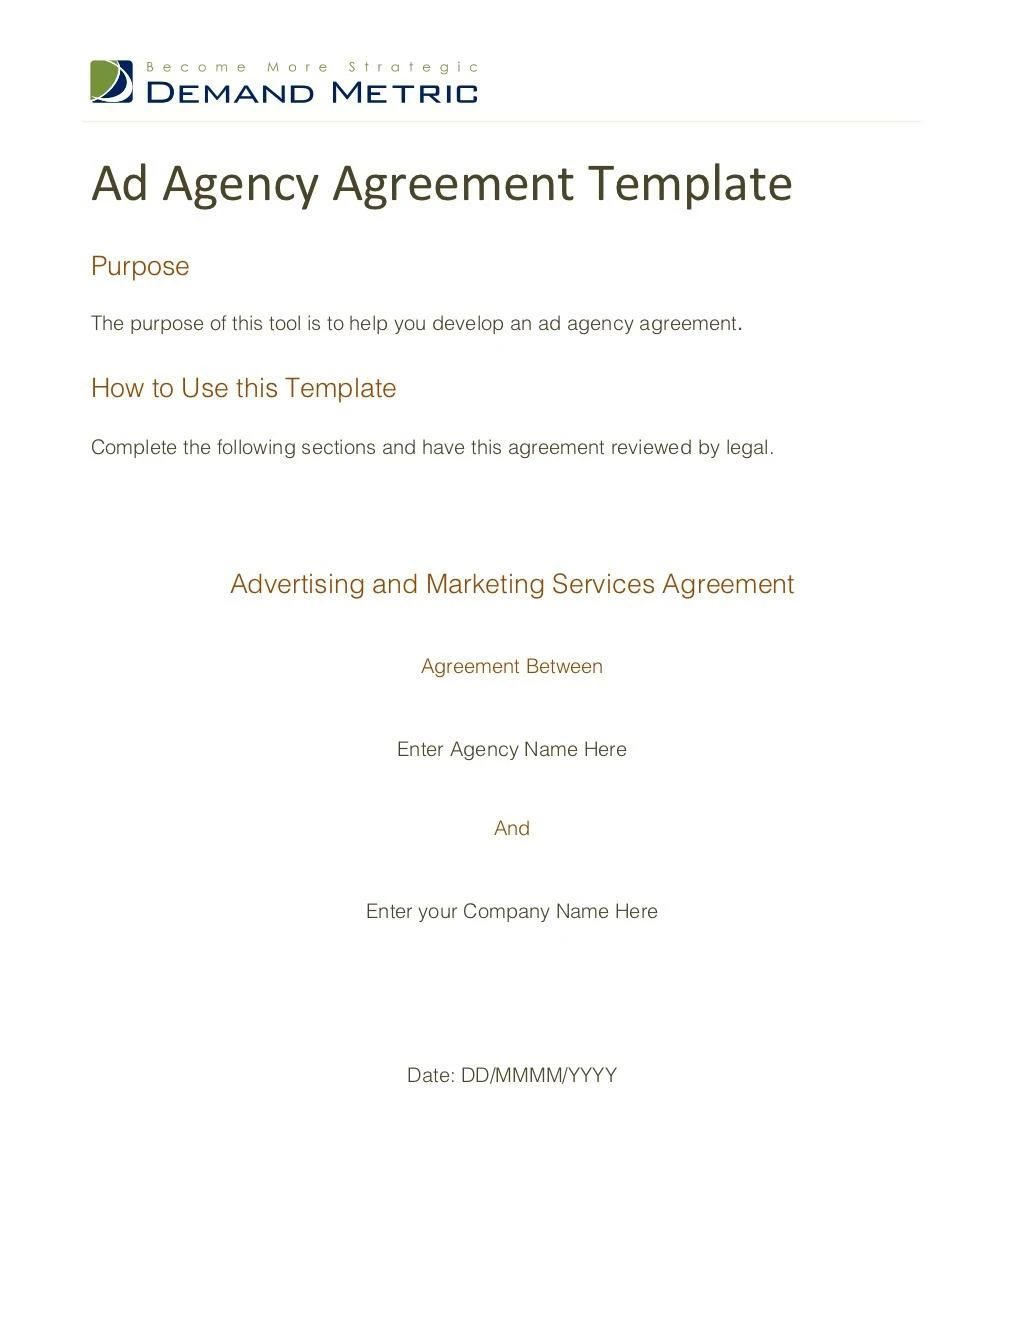 ad agency agreement